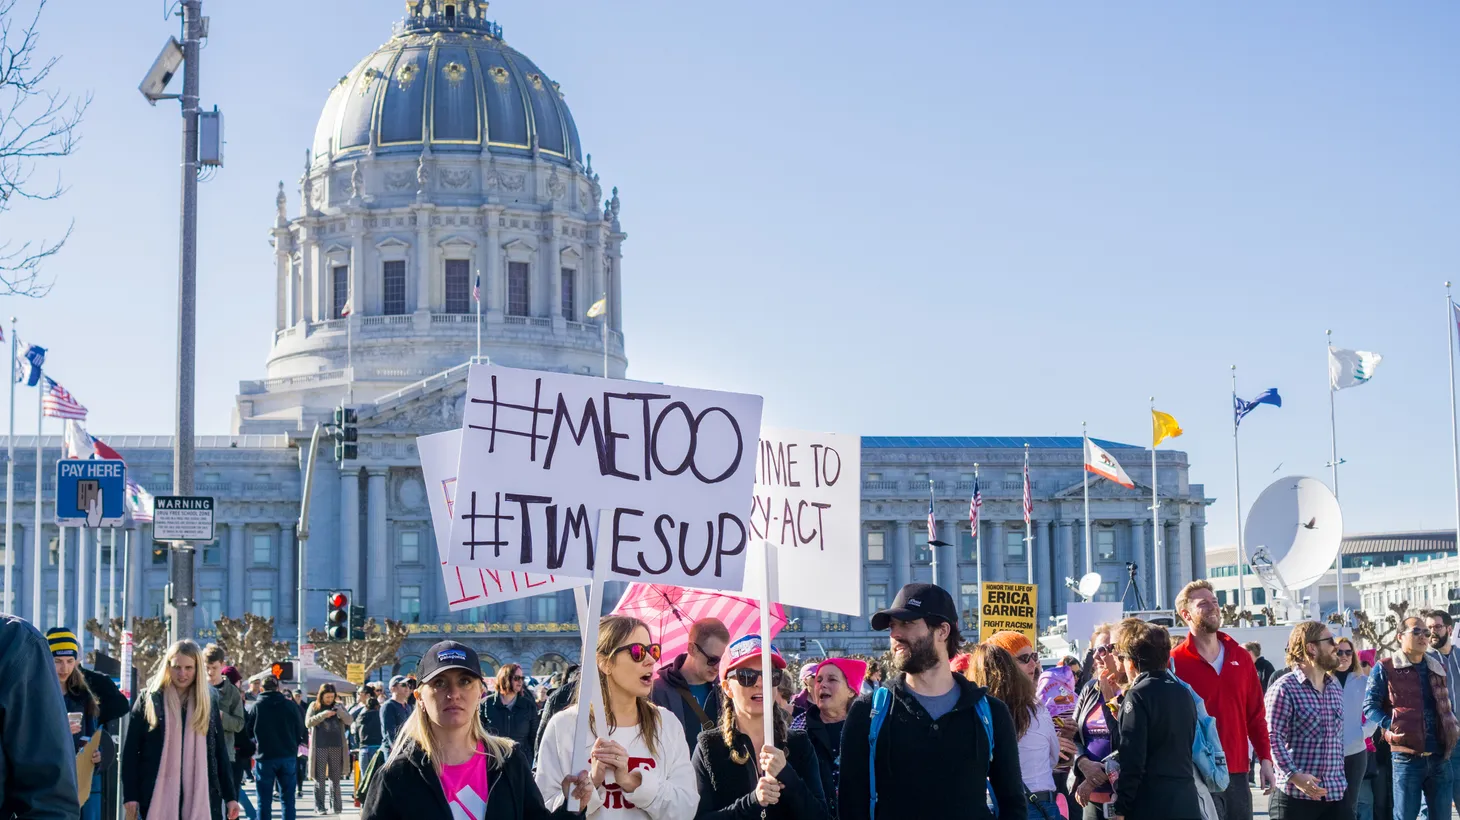 #Metoo activists march and hold signs in front of San Francisco City Hall, January 20, 2018.